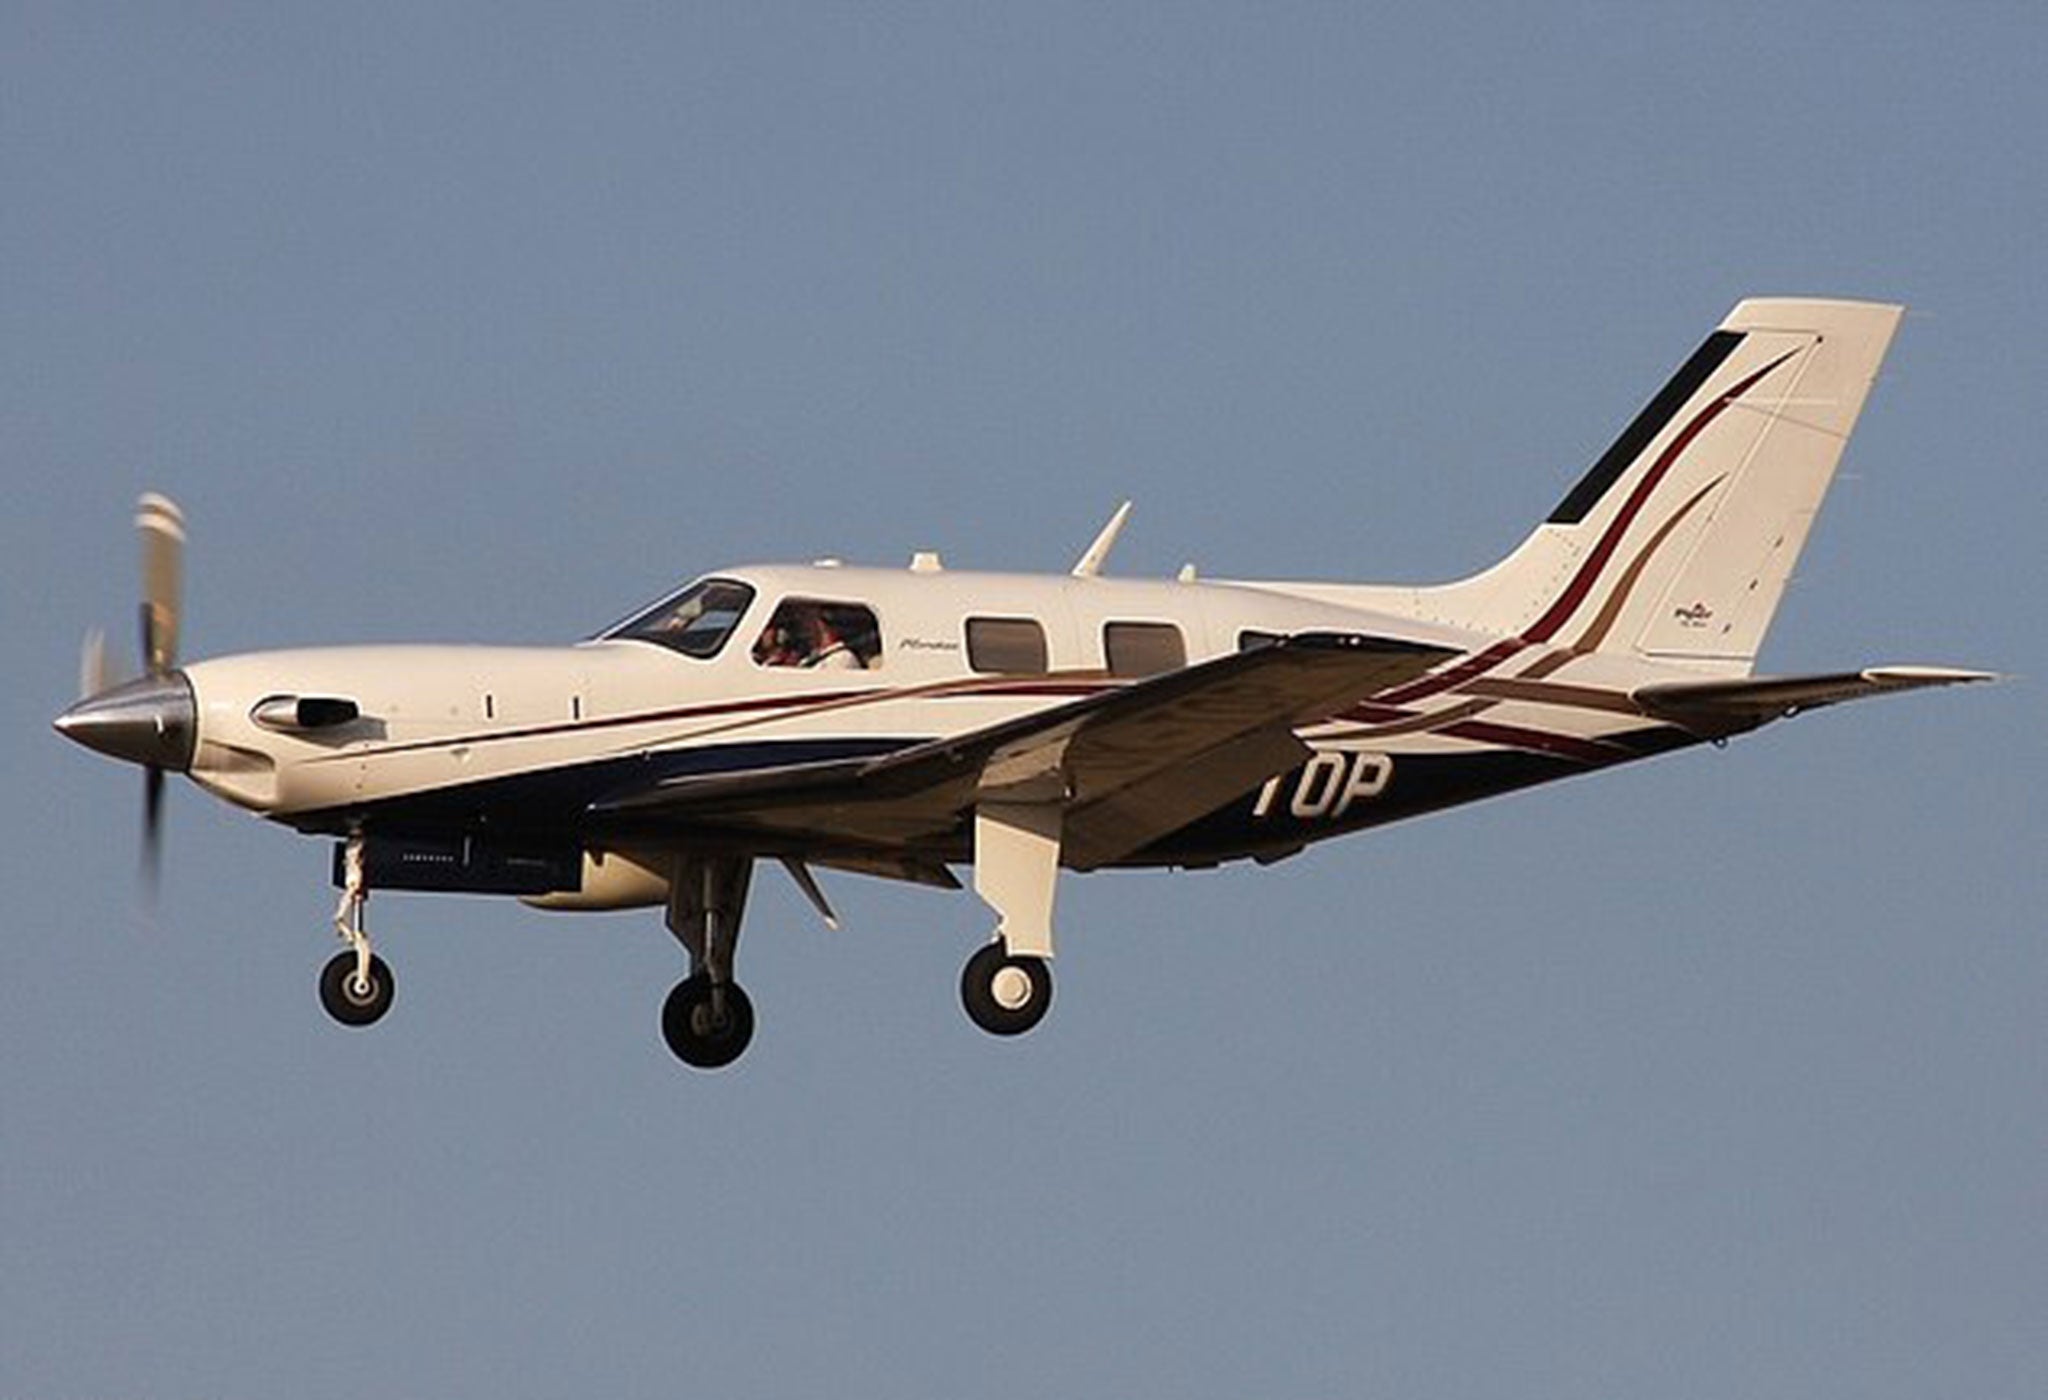 The Piper Malibu light aircraft was travelling from Nantes in western France to Cardiff